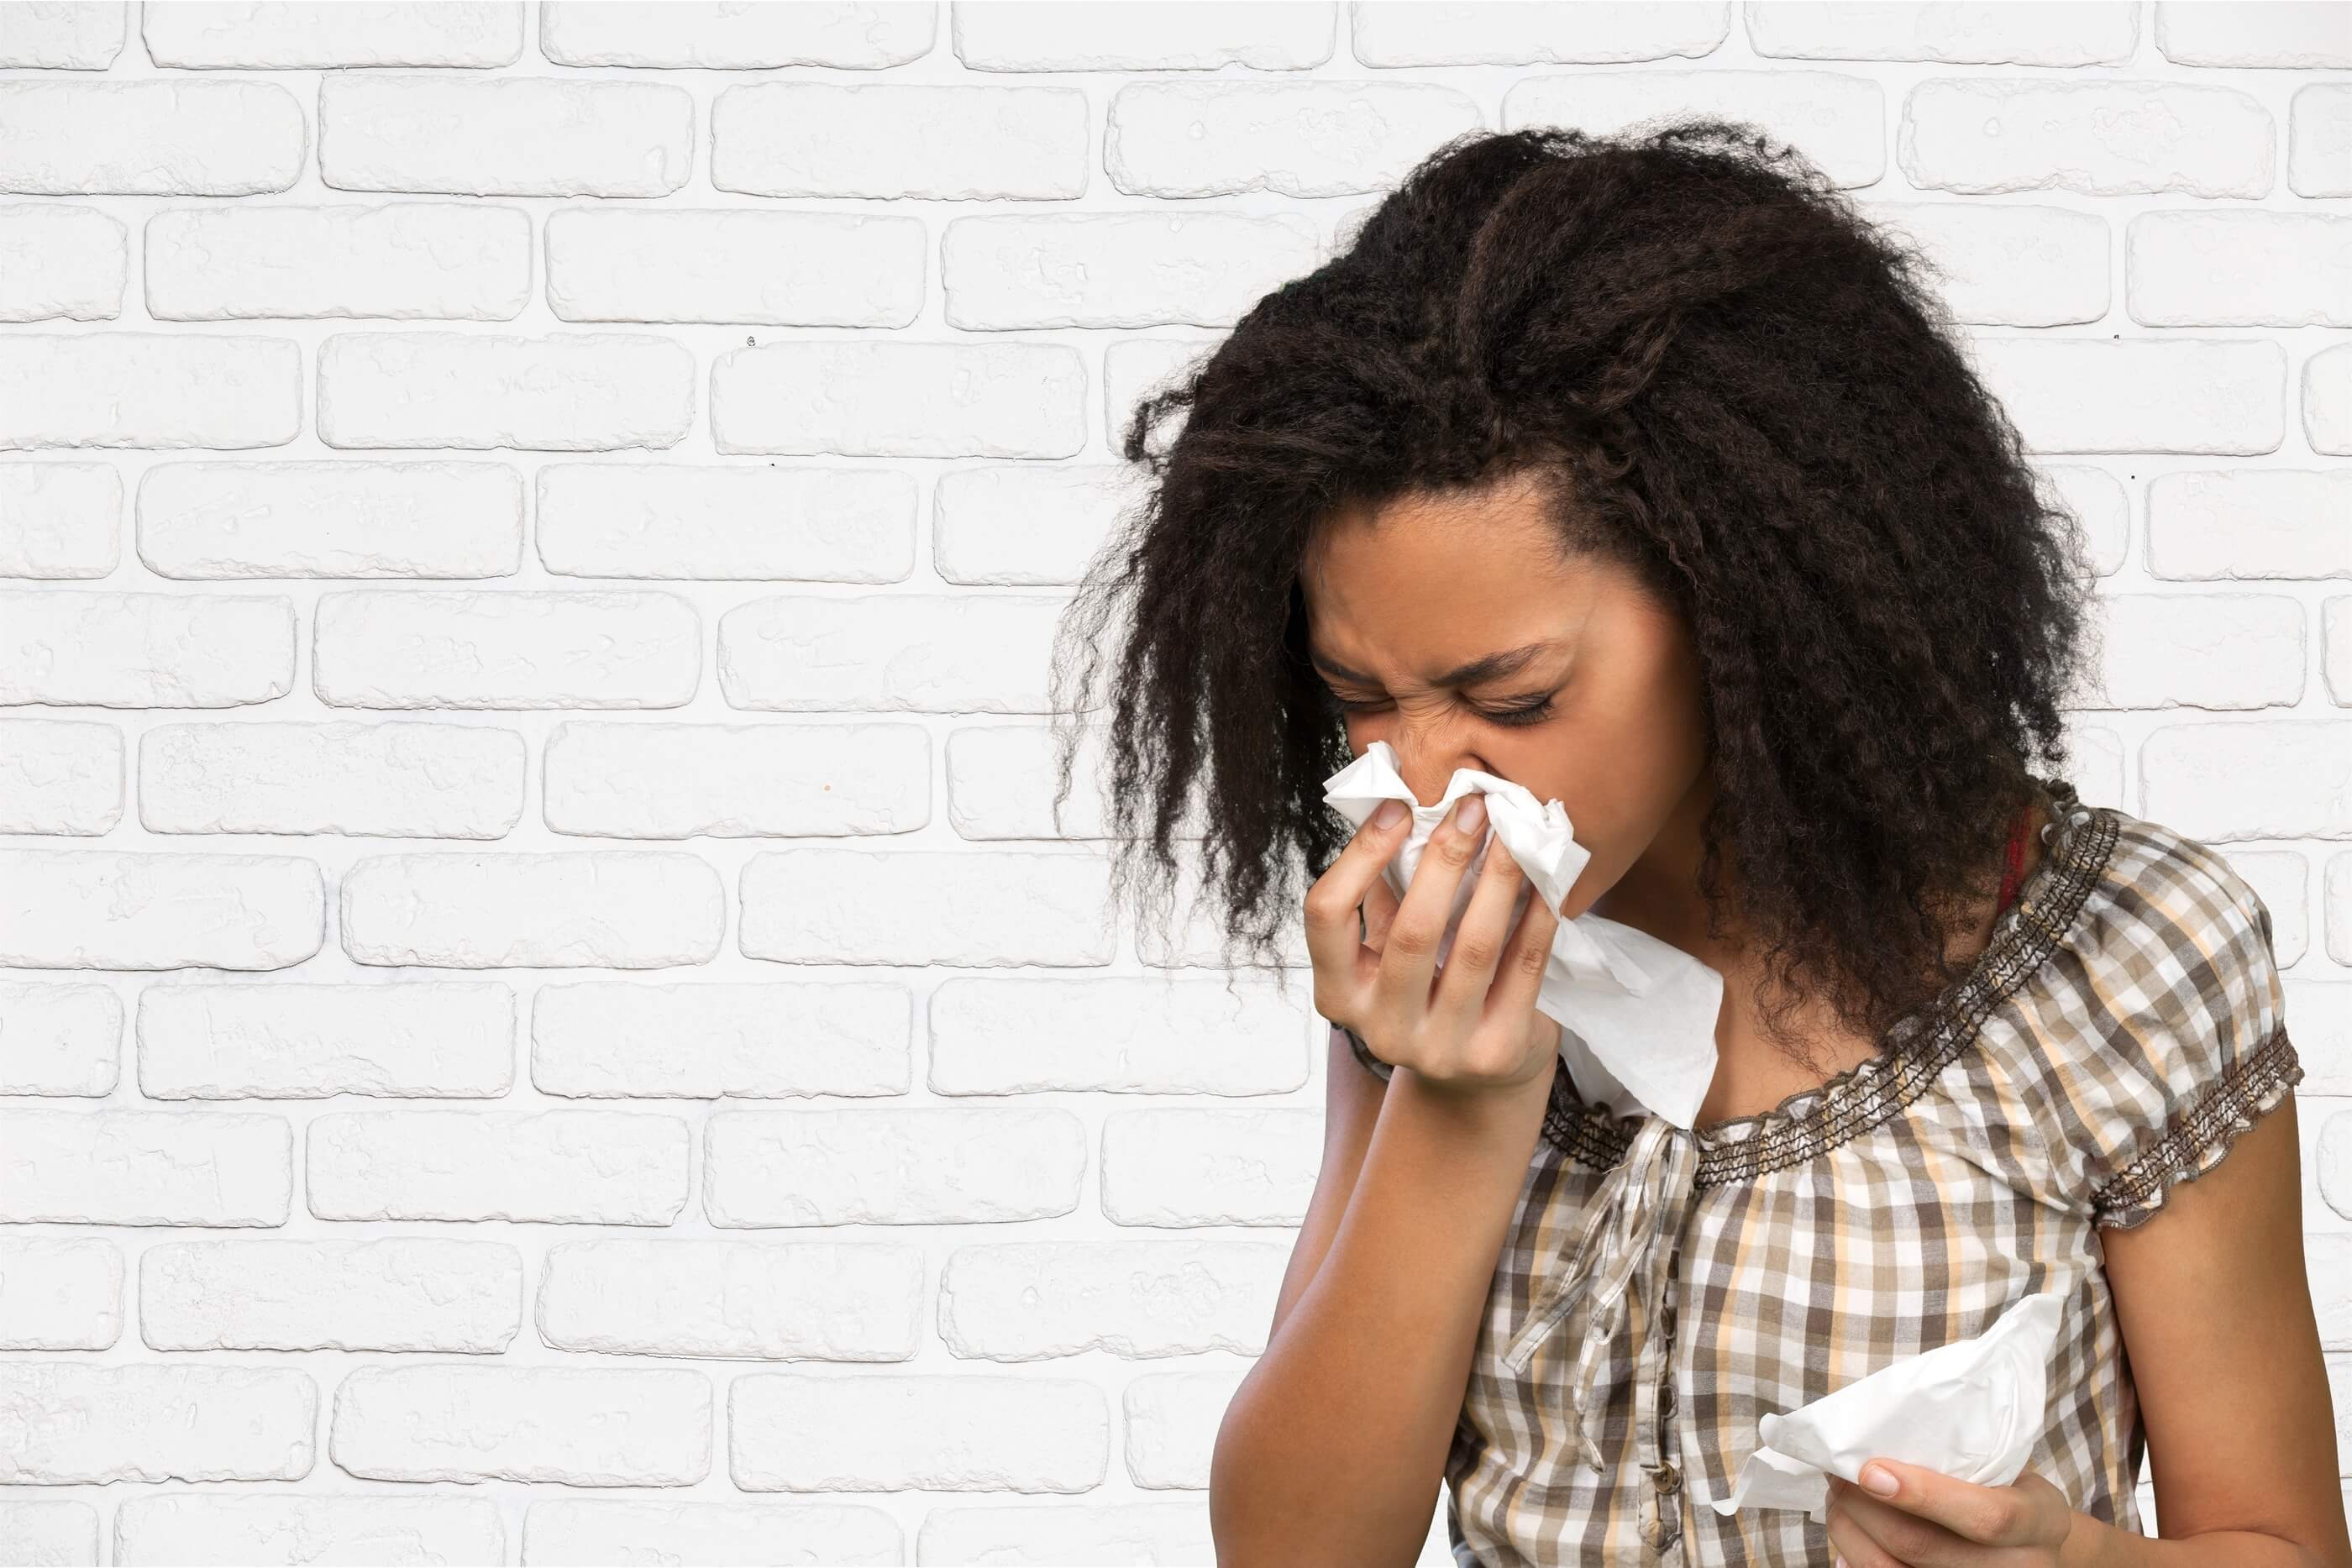 Sinus Infection vs Cold vs Allergies: What's the Difference?